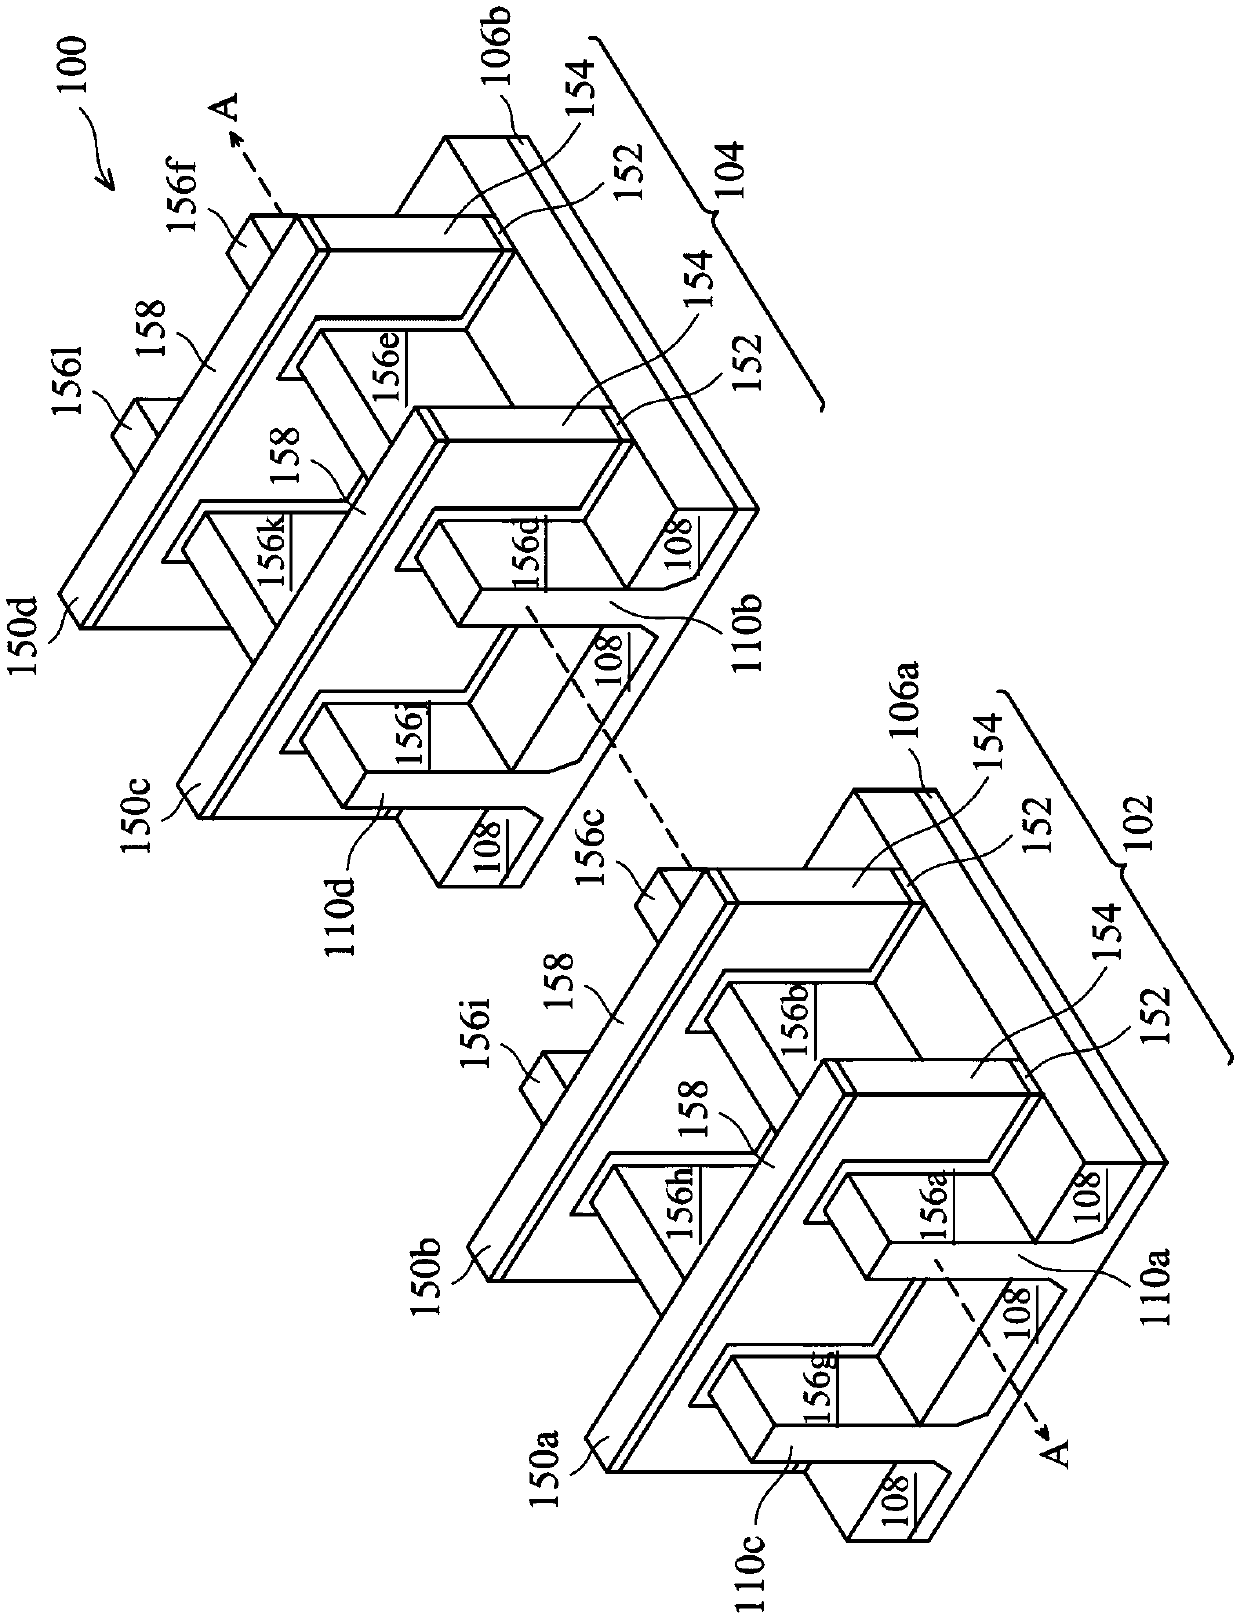 Method for patterning a lanthanum containing layer